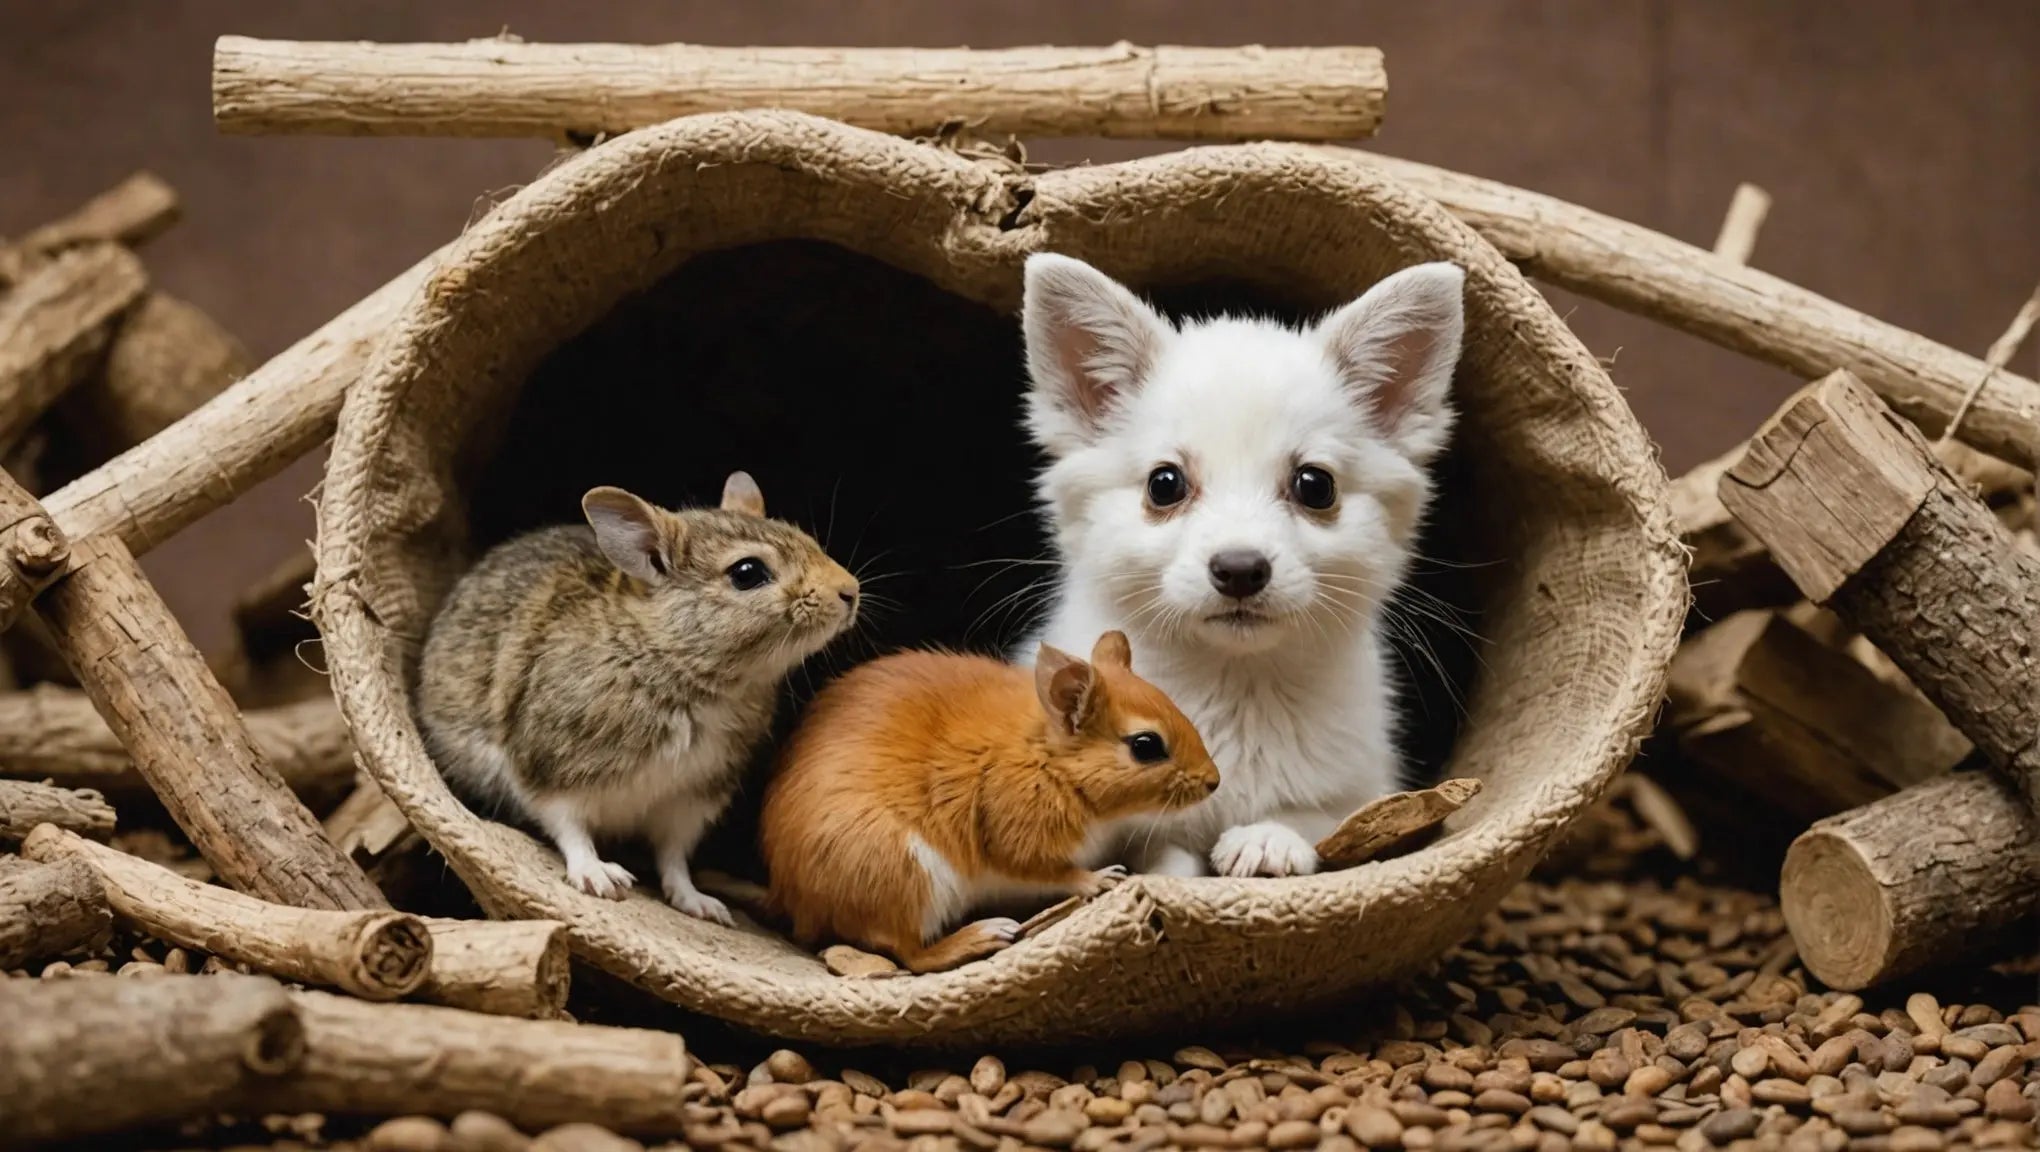 Explore a Wide Range of Small Animal Supplies for Your Furry Friends